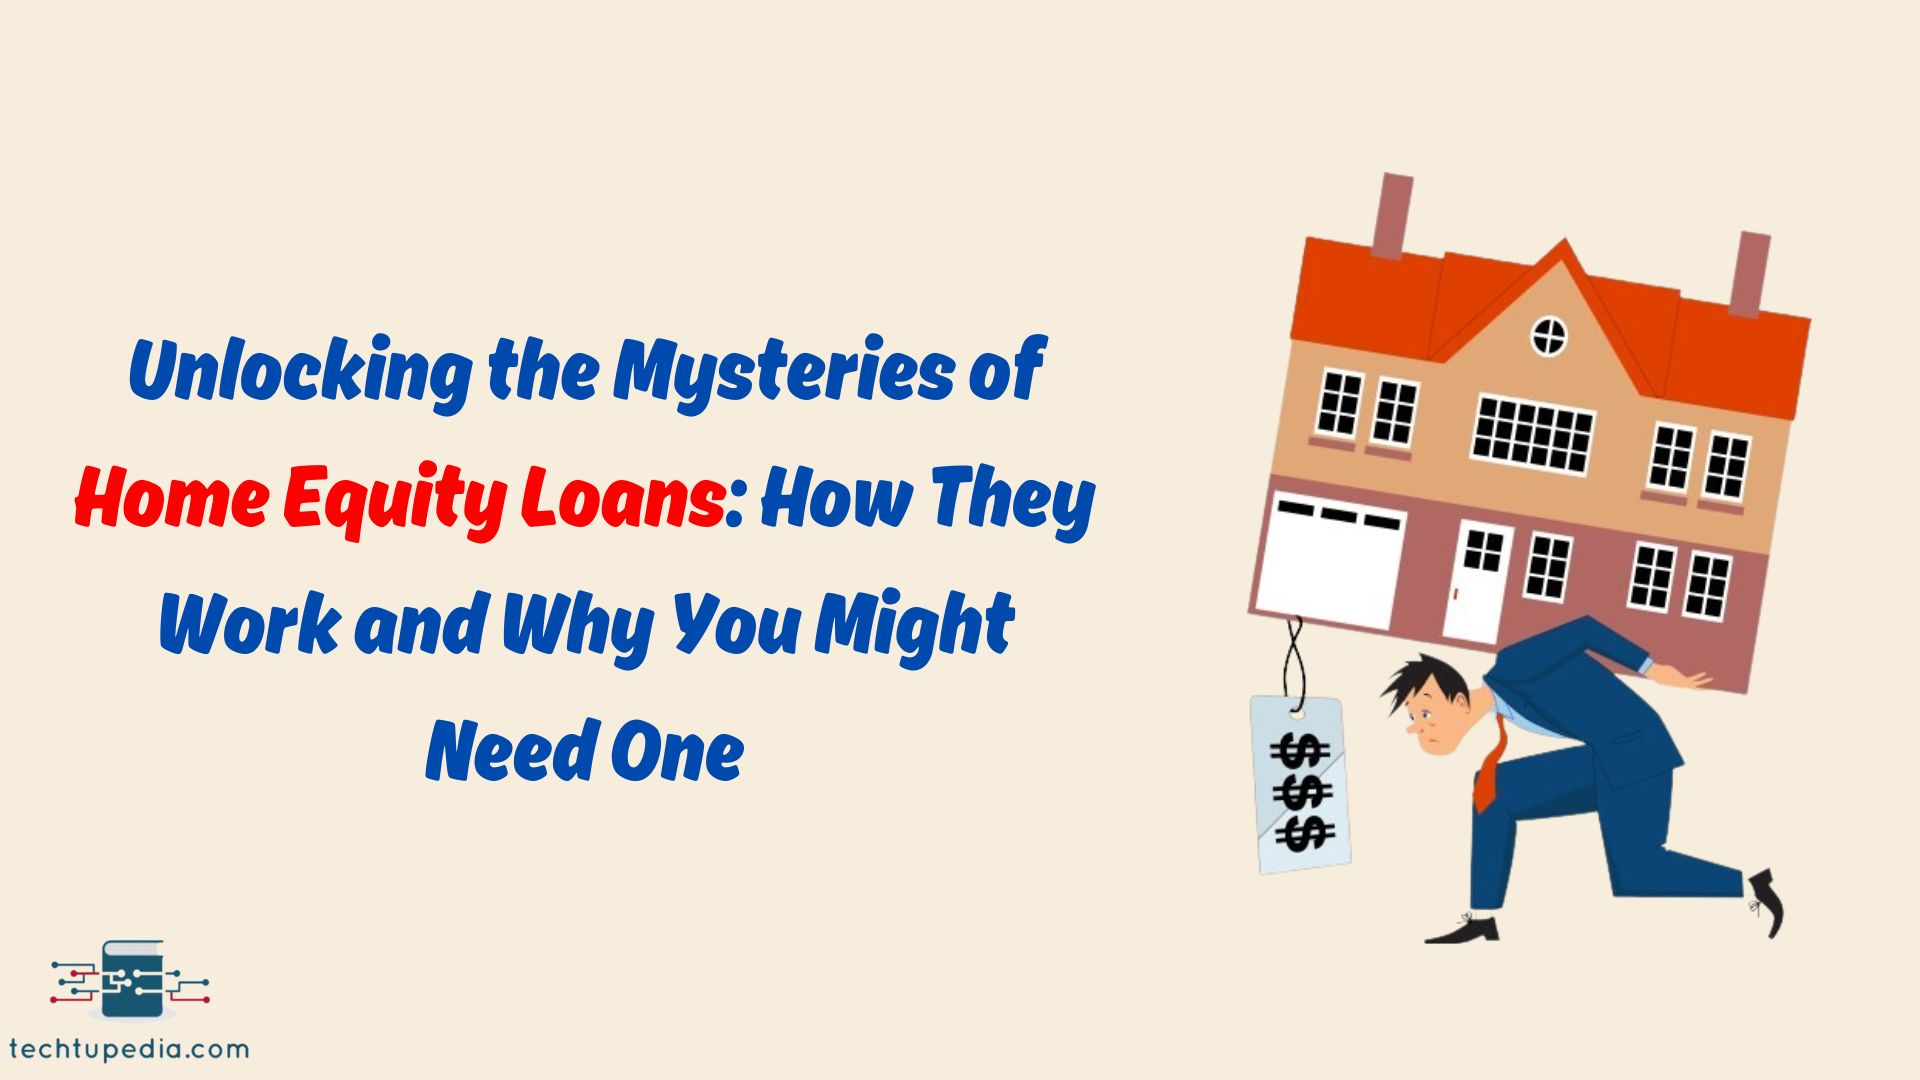 Unlocking the Mysteries of Home Equity Loans: How They Work and Why You Might Need One